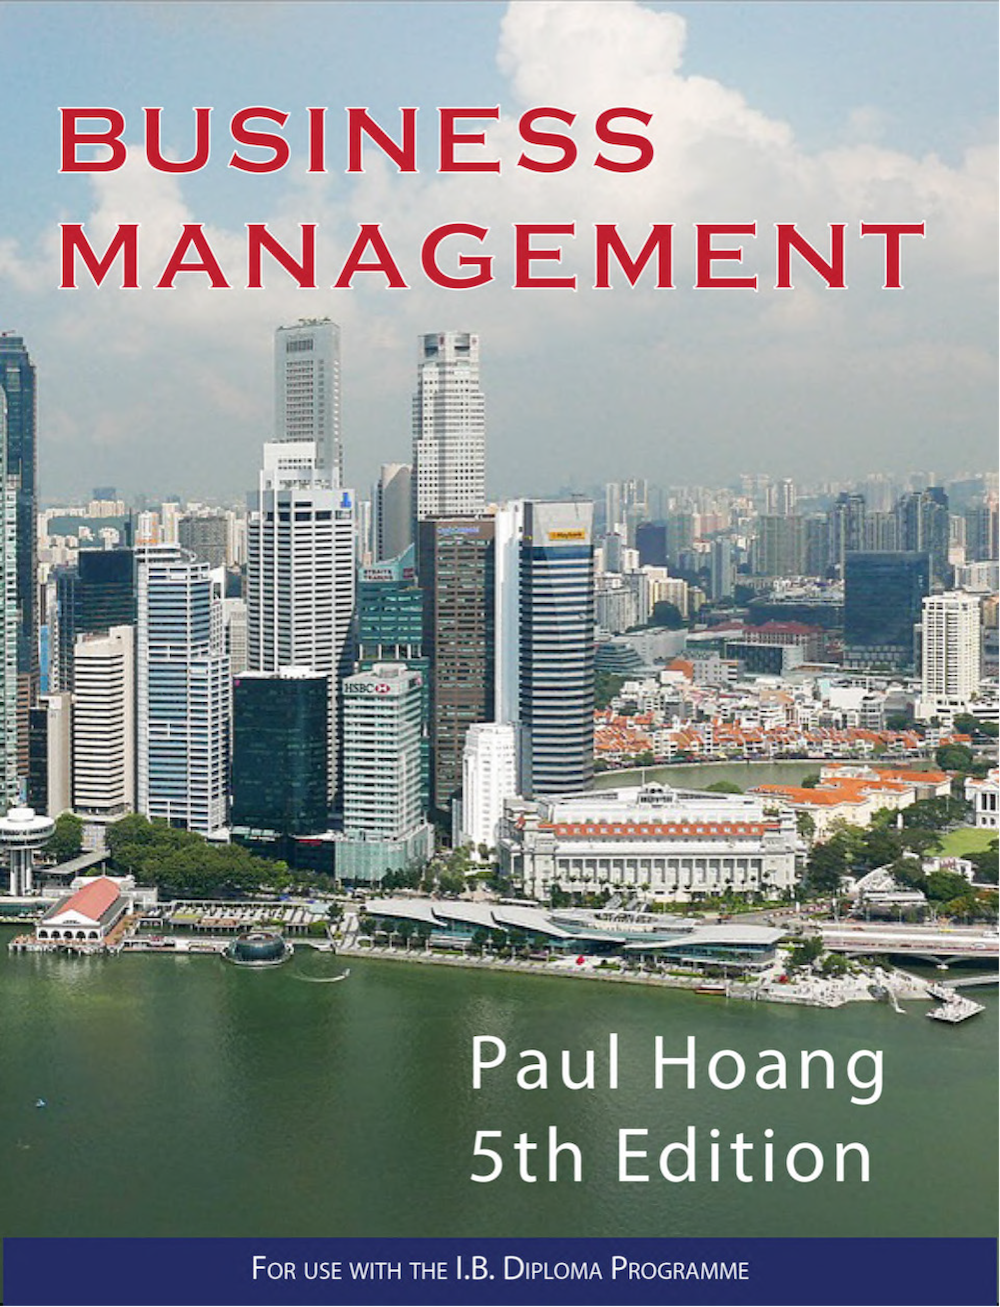 Business　5th　Management　Edition　9781921917820　IB